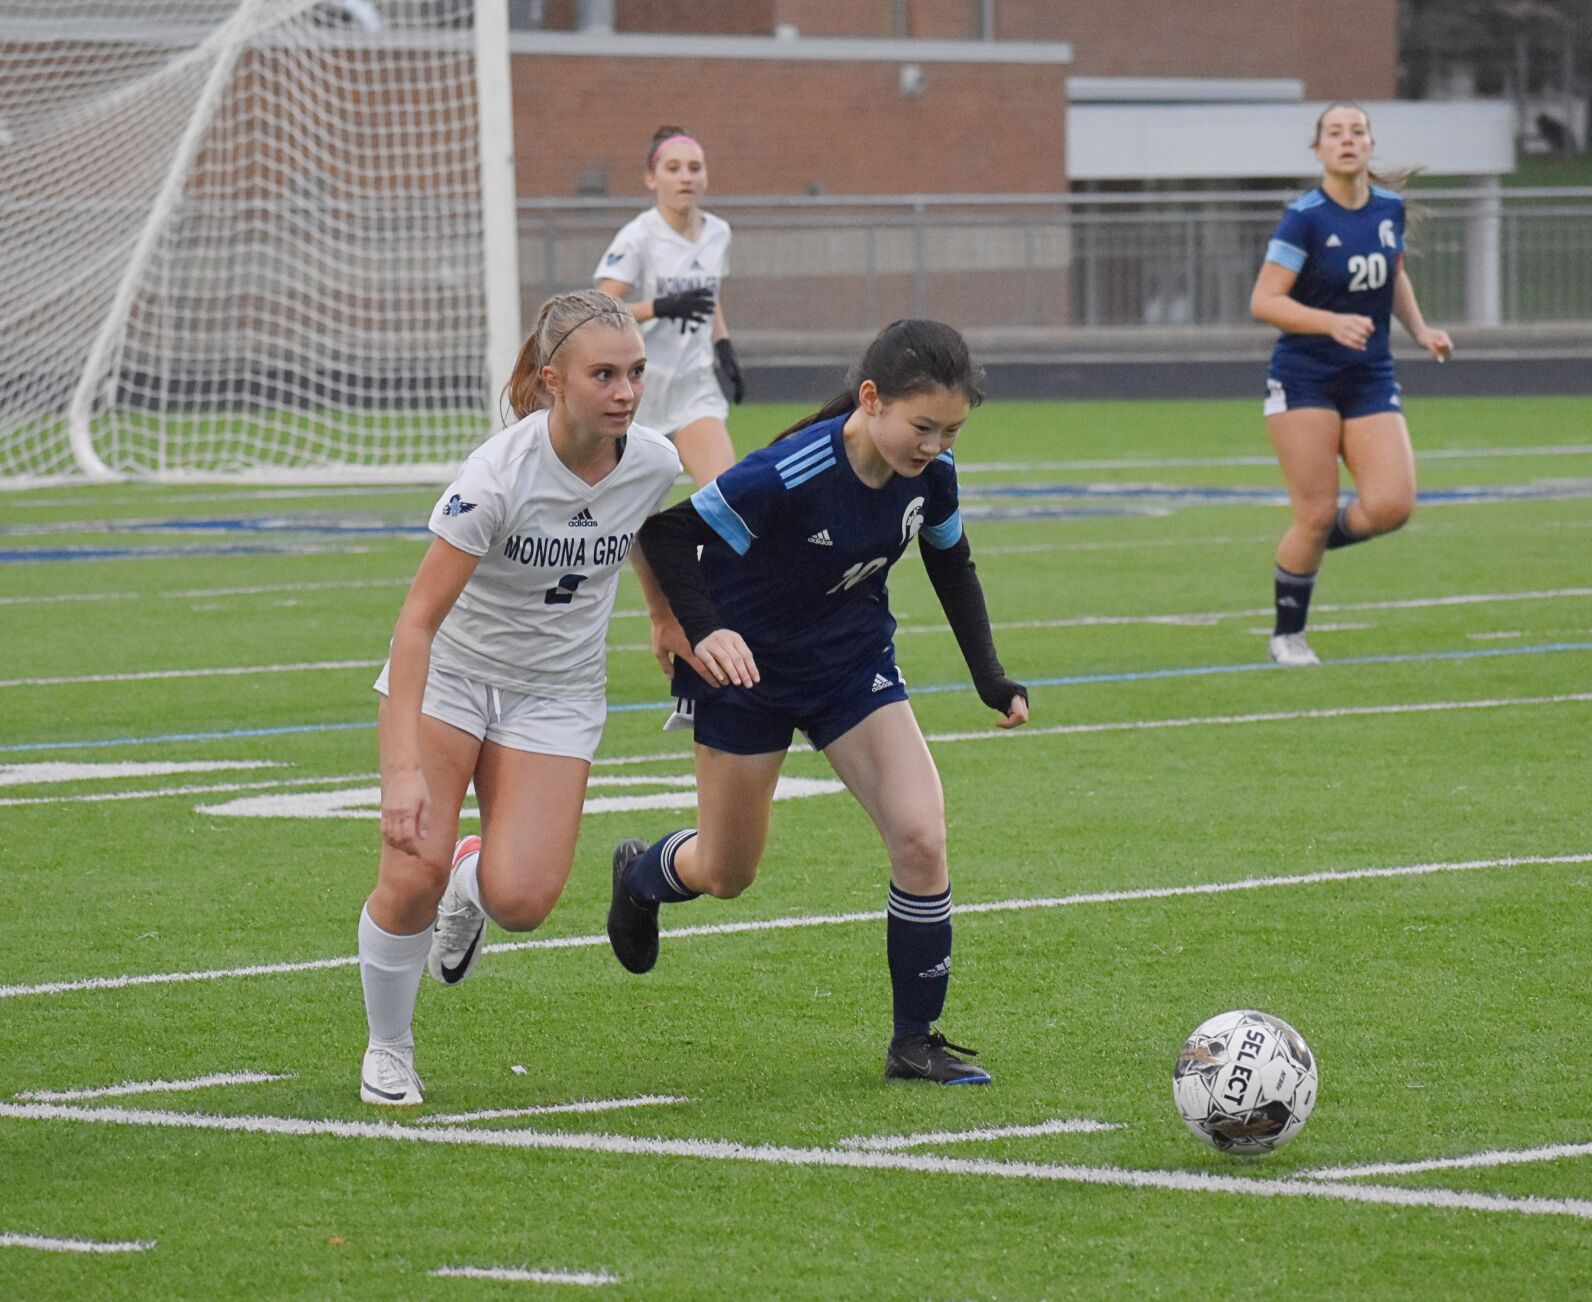 McFarland girls soccer and Monona Grove girls soccer ends in a draw